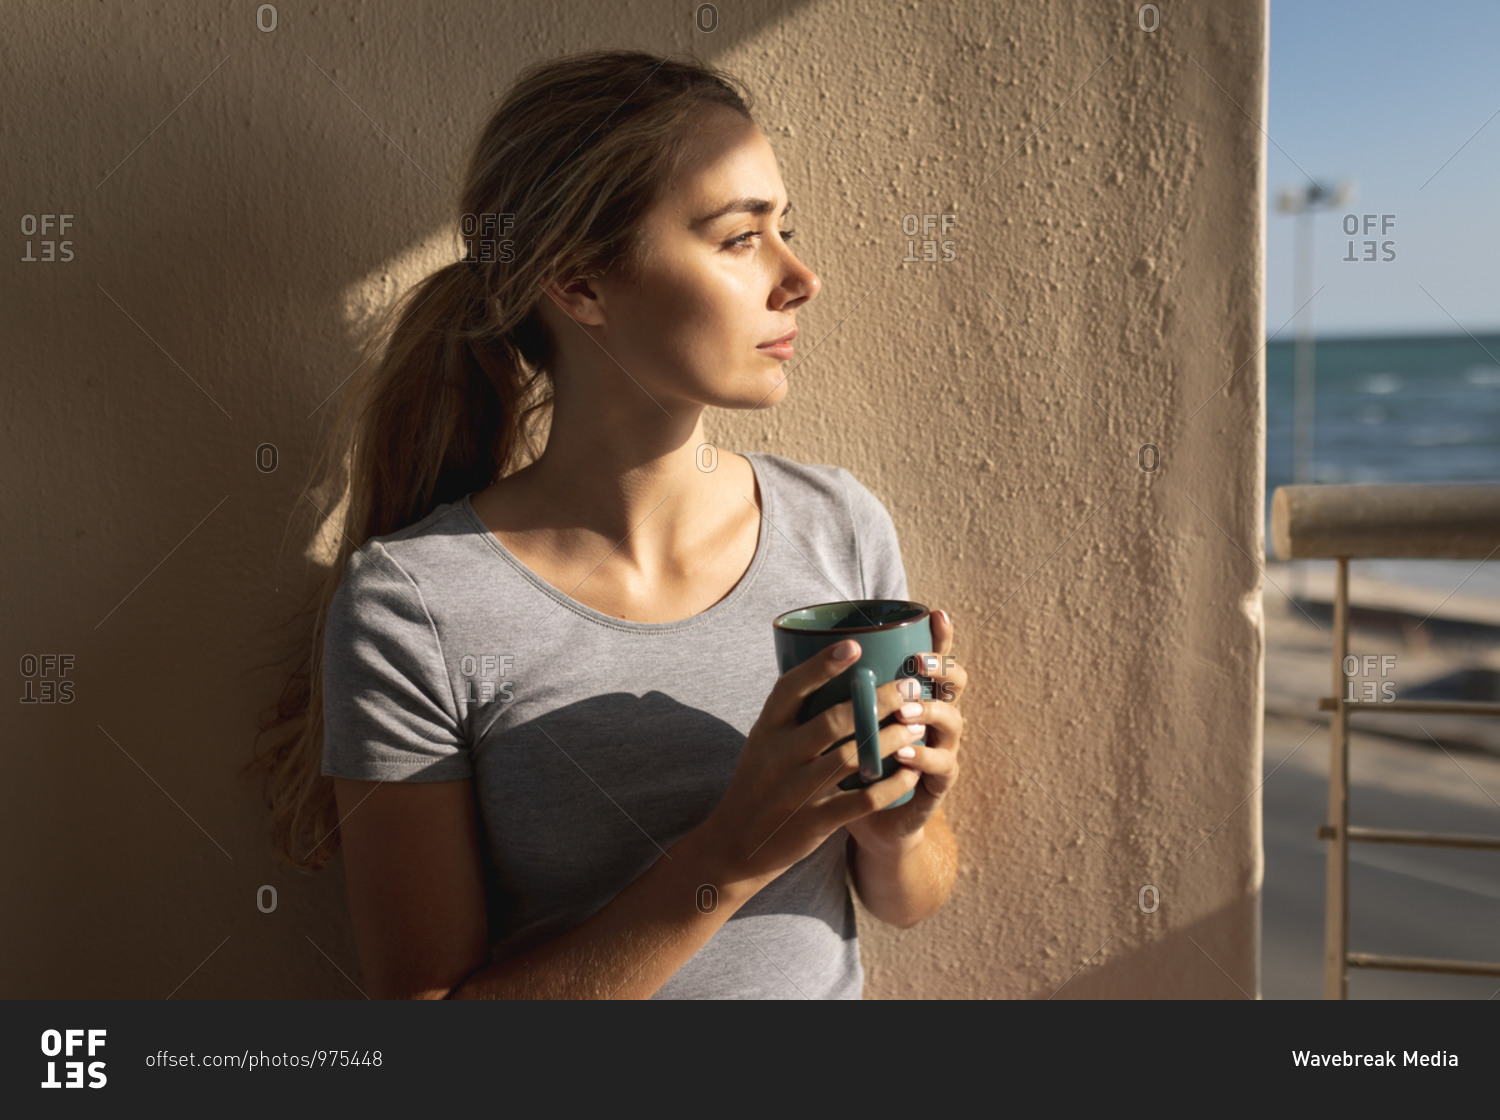 Caucasian woman standing on a balcony, holding a cup of coffee and looking away. Social distancing and self isolation in quarantine lockdown.